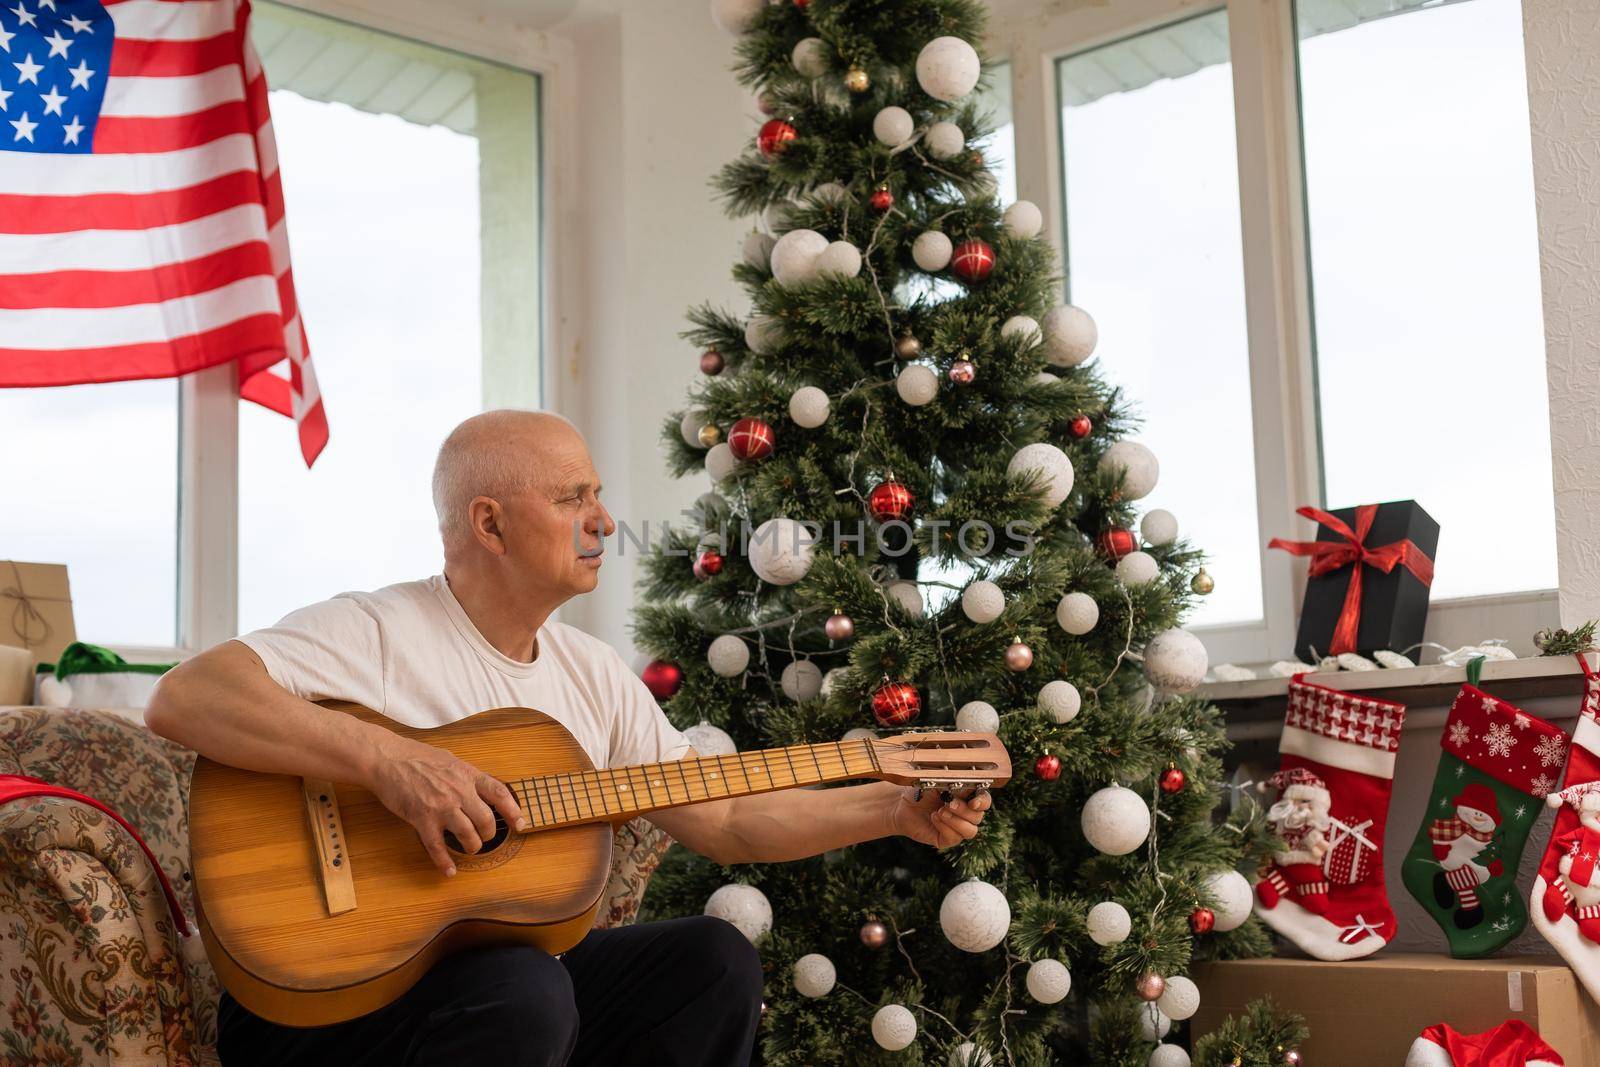 man holding guitar in front American Flag haning behind him at christmas.